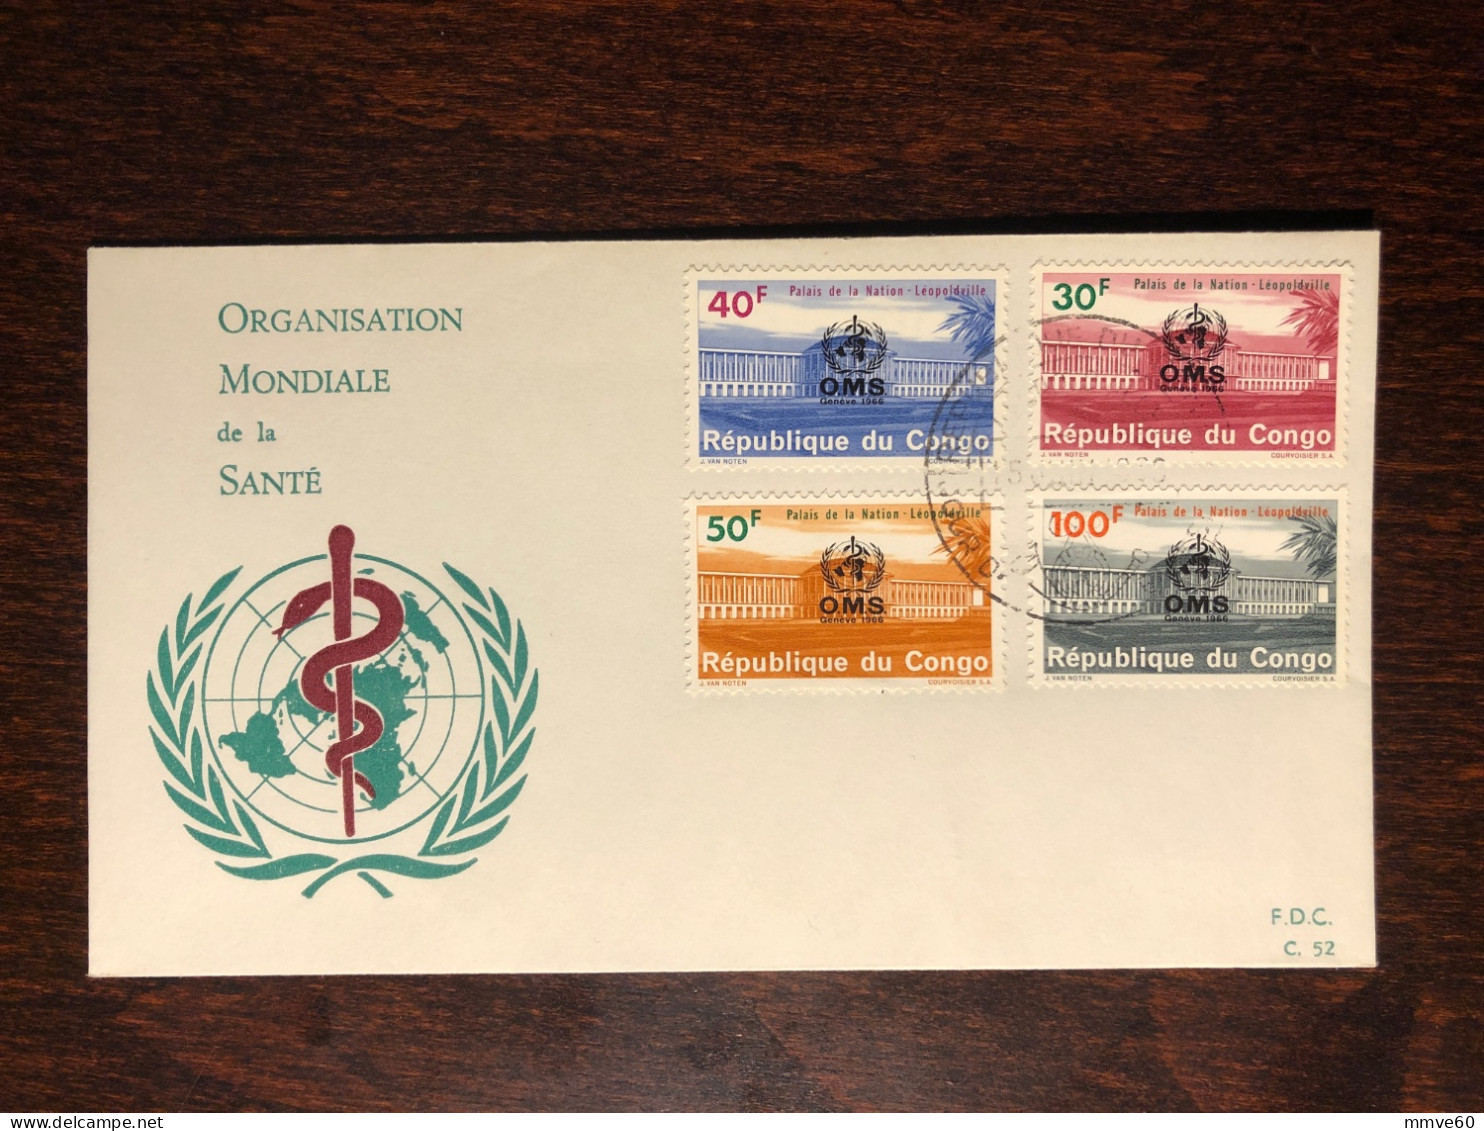 CONGO FDC COVER 1966 YEAR WHO OMS HEALTH MEDICINE STAMPS - FDC